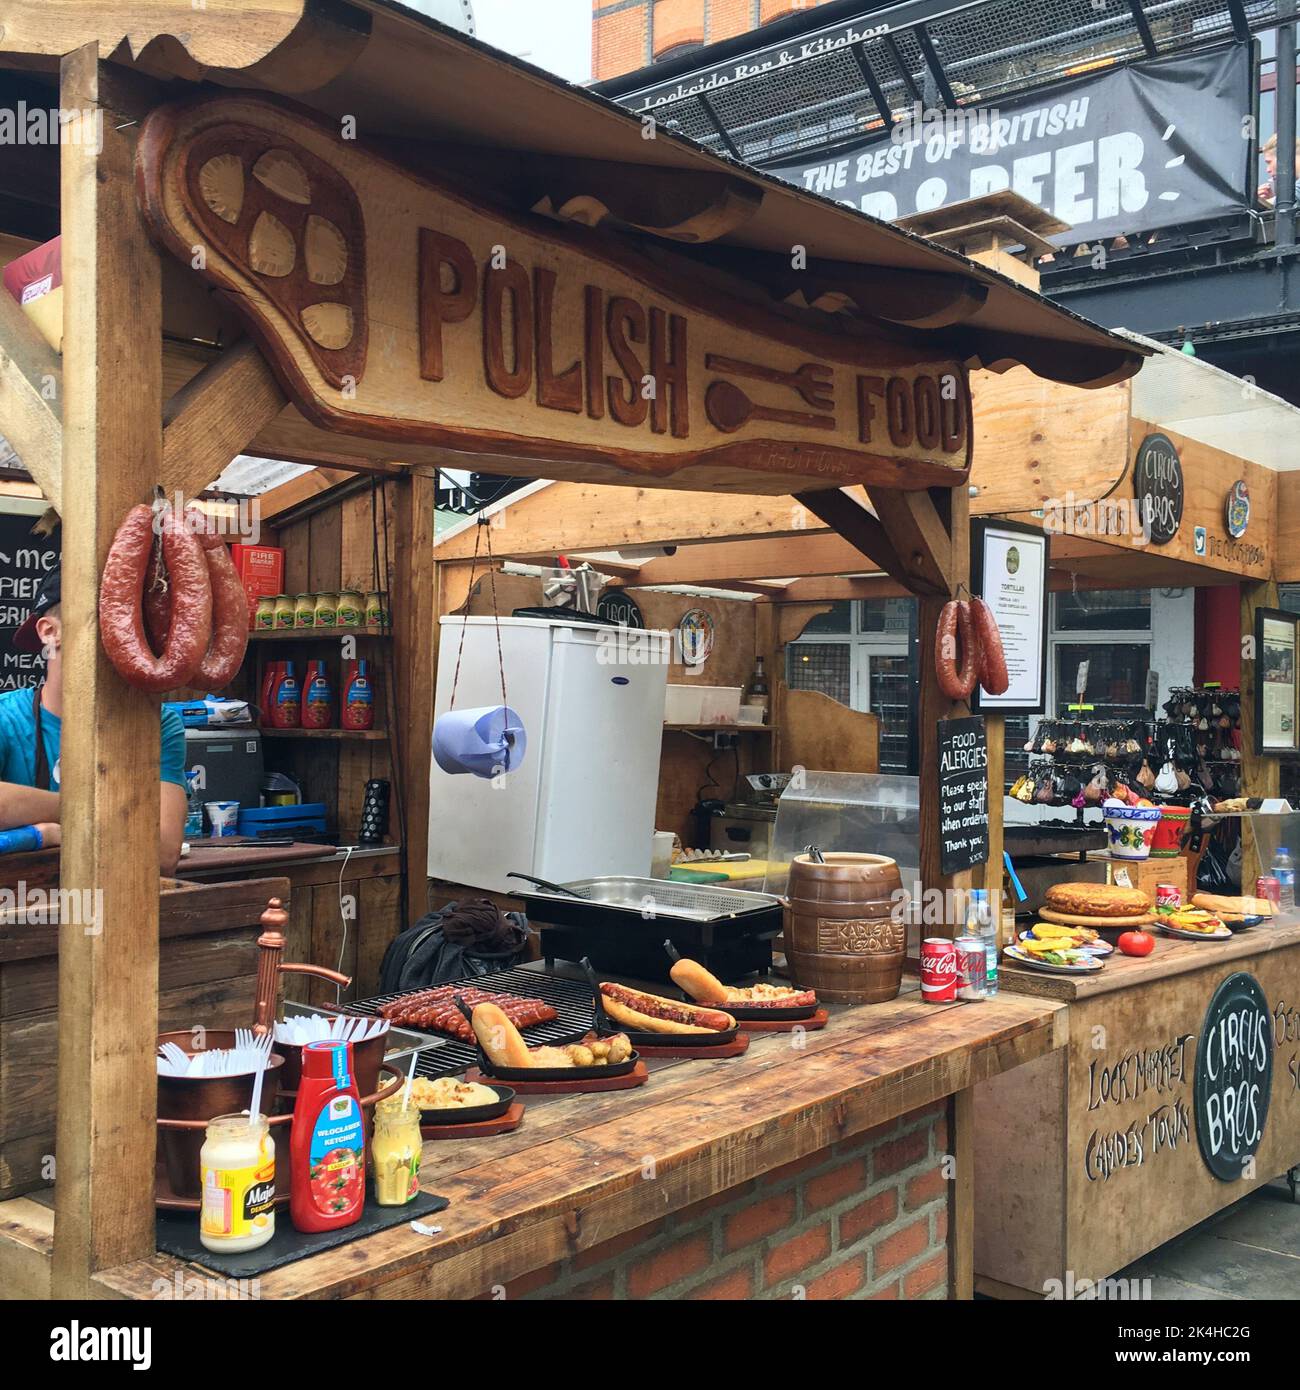 A polish food stand selling sausages and brats. Taken in London UK on 19-09-2019 Stock Photo